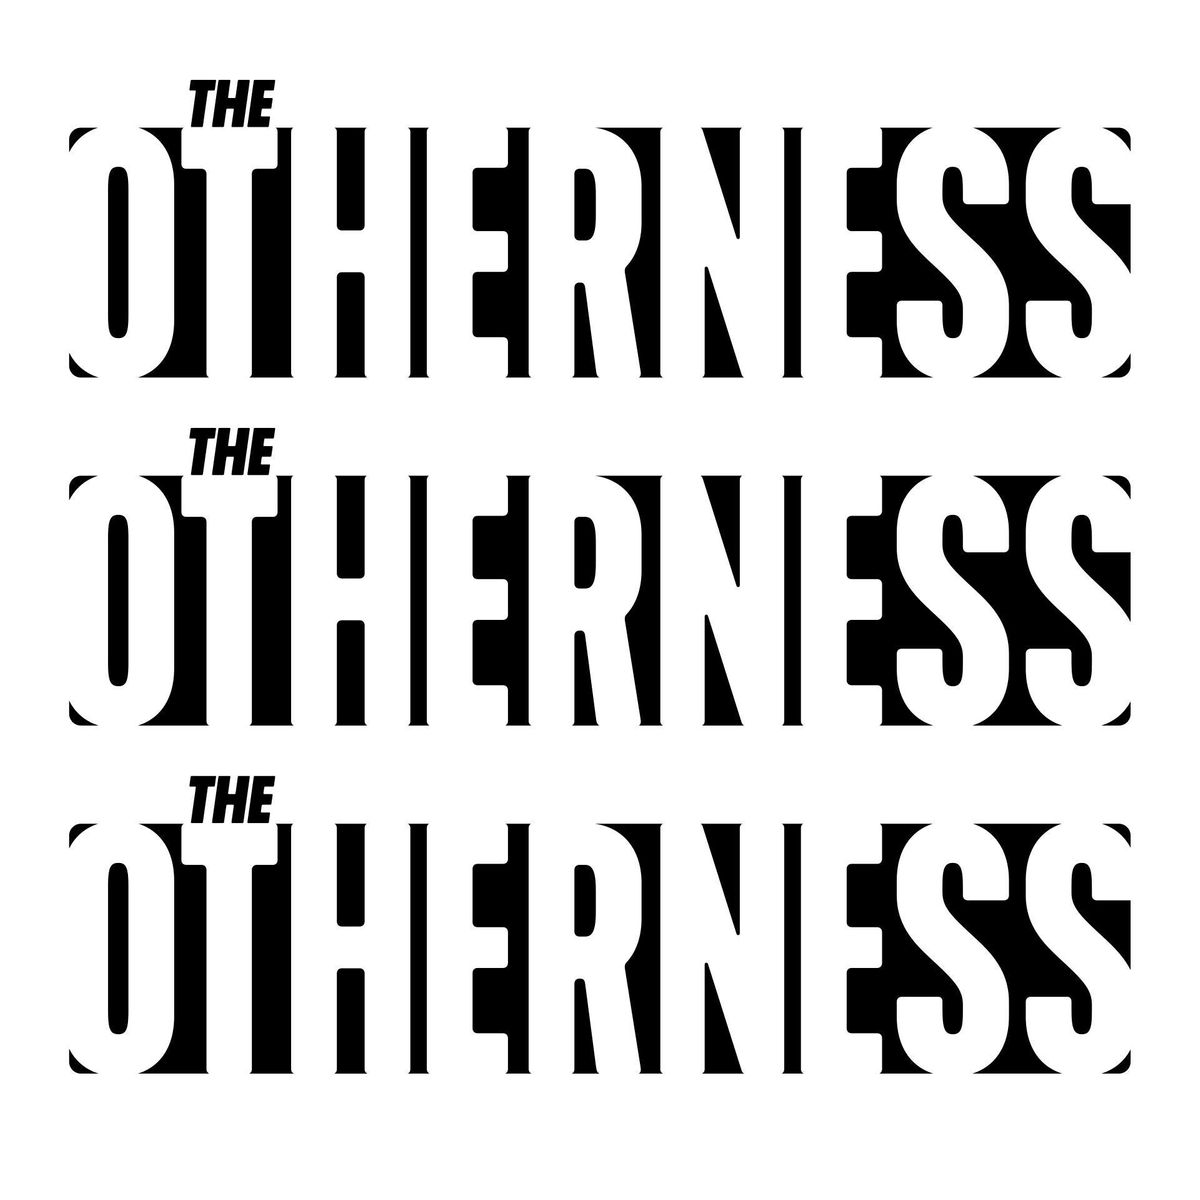 #Introducing - The Otherness